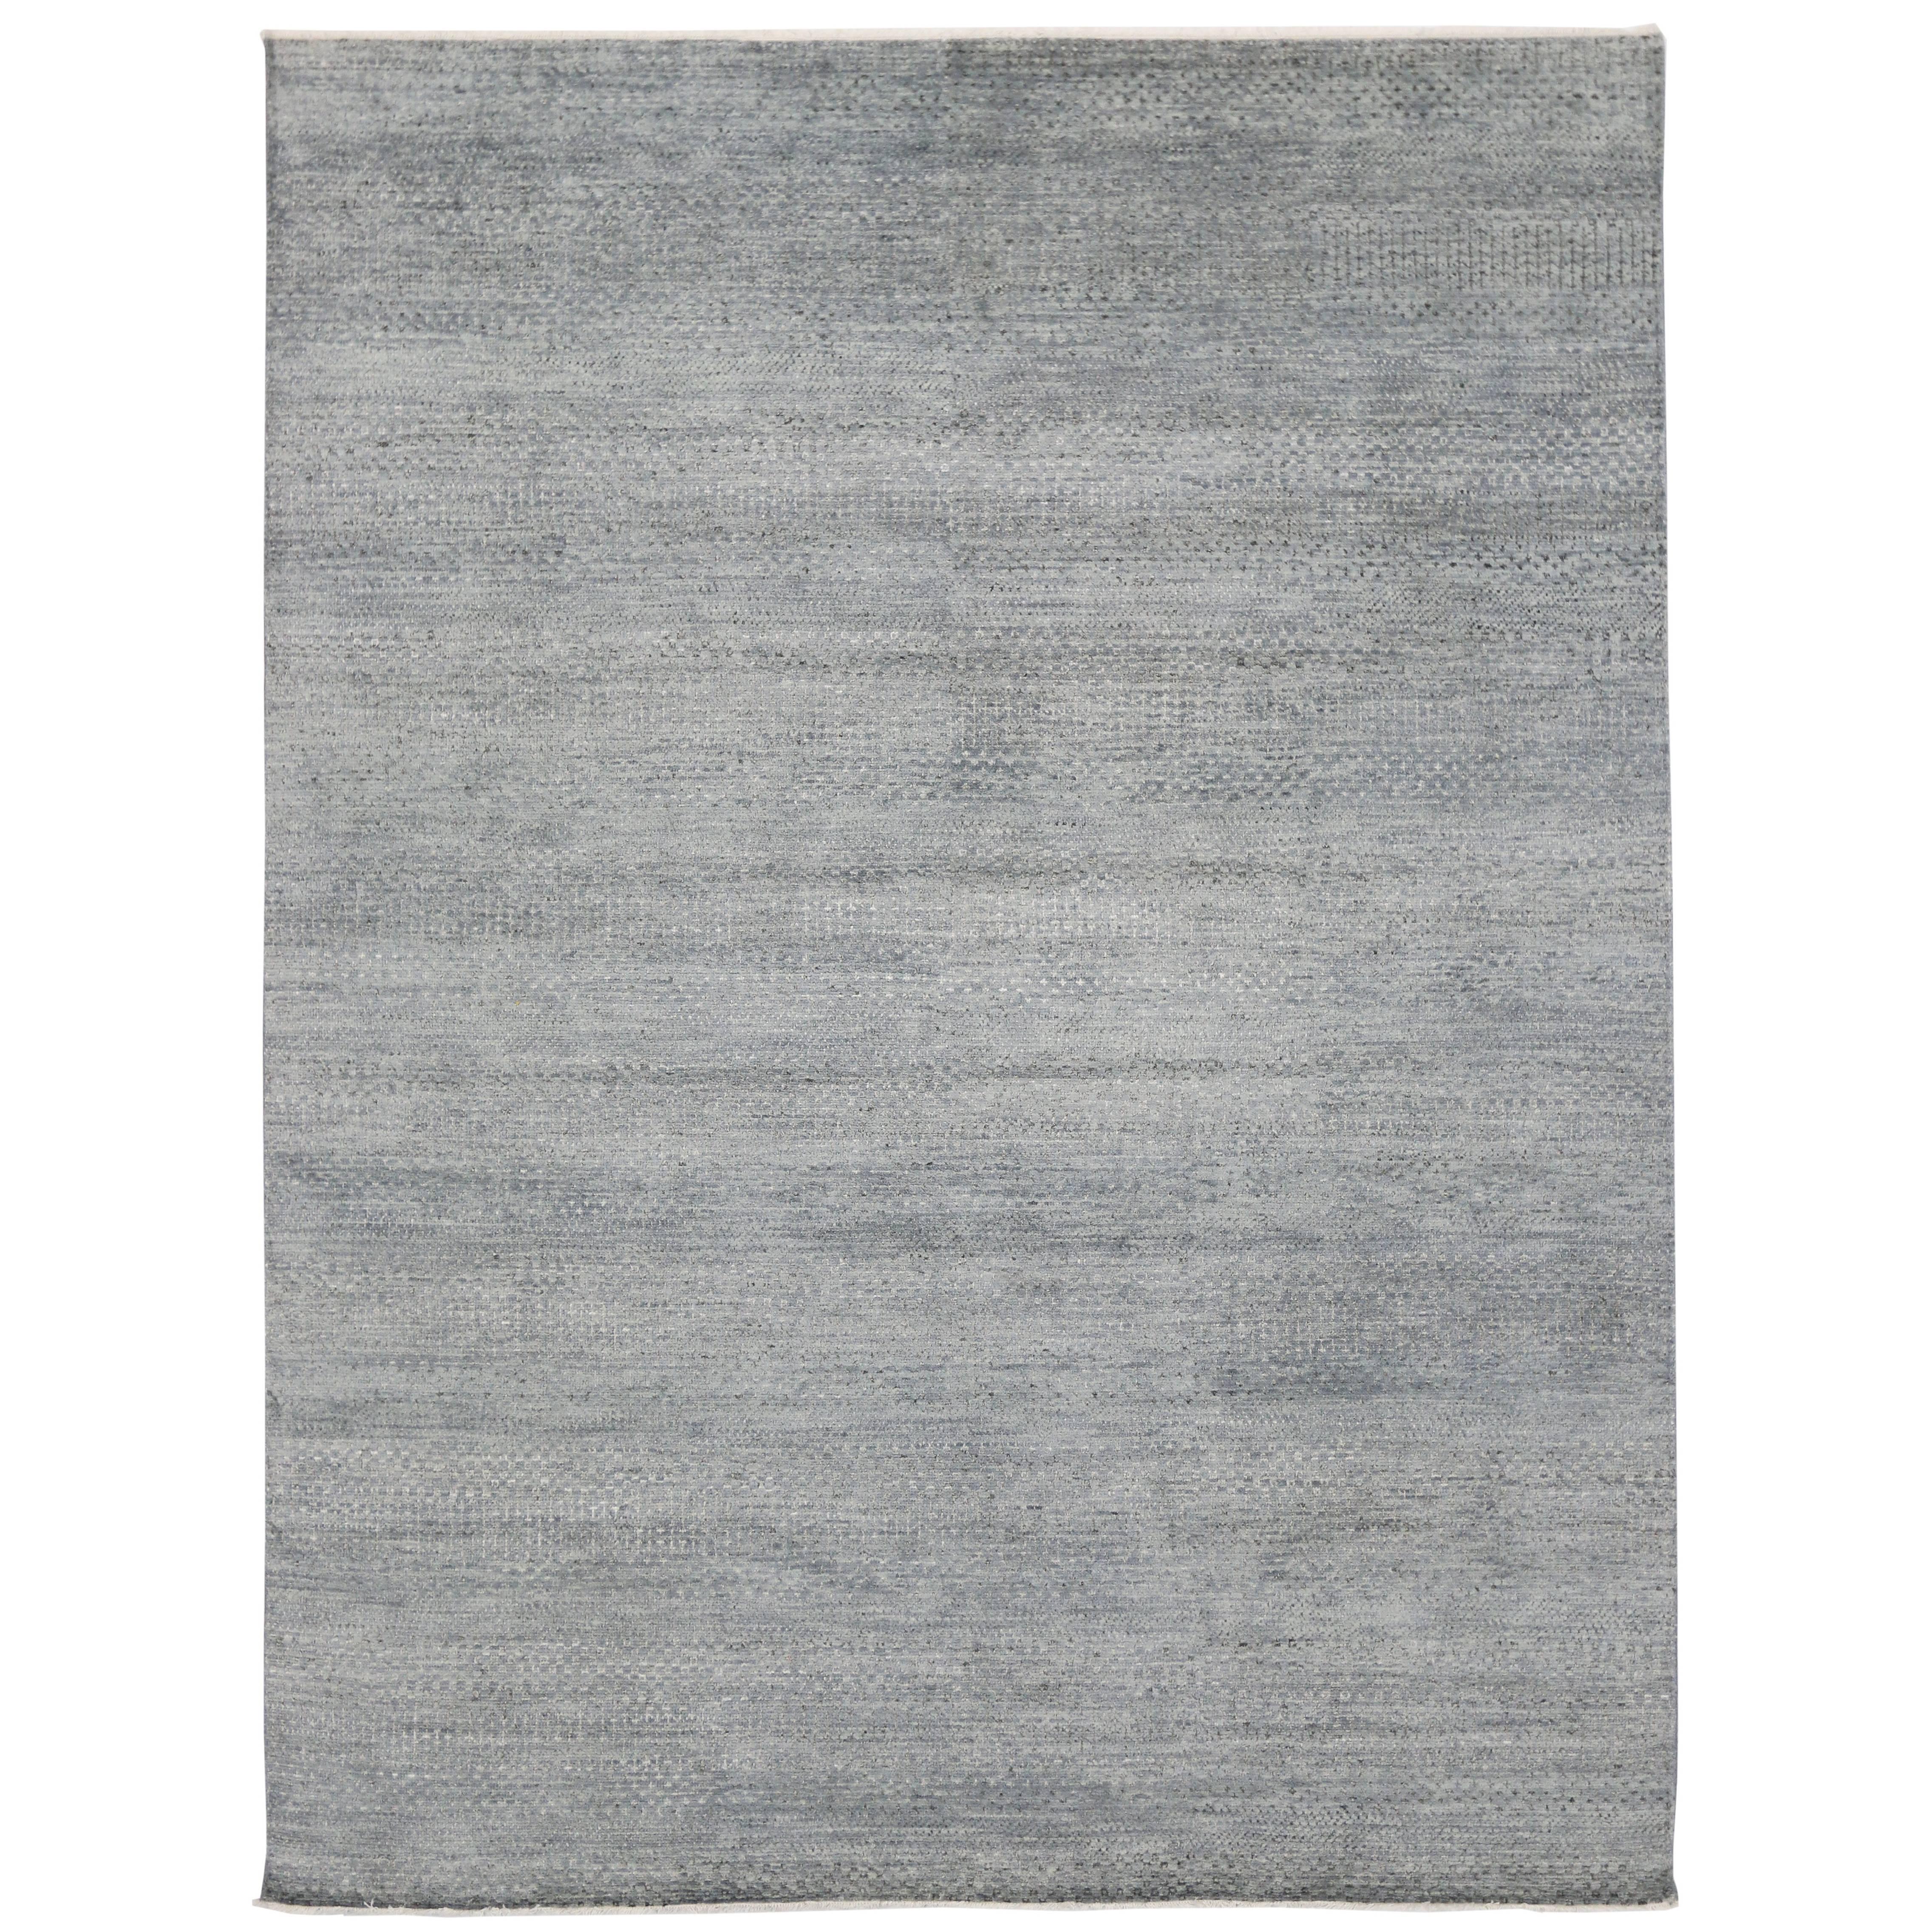 Transitional Grass Cloth Patterned Slate Blue Area Rug with Modern Style